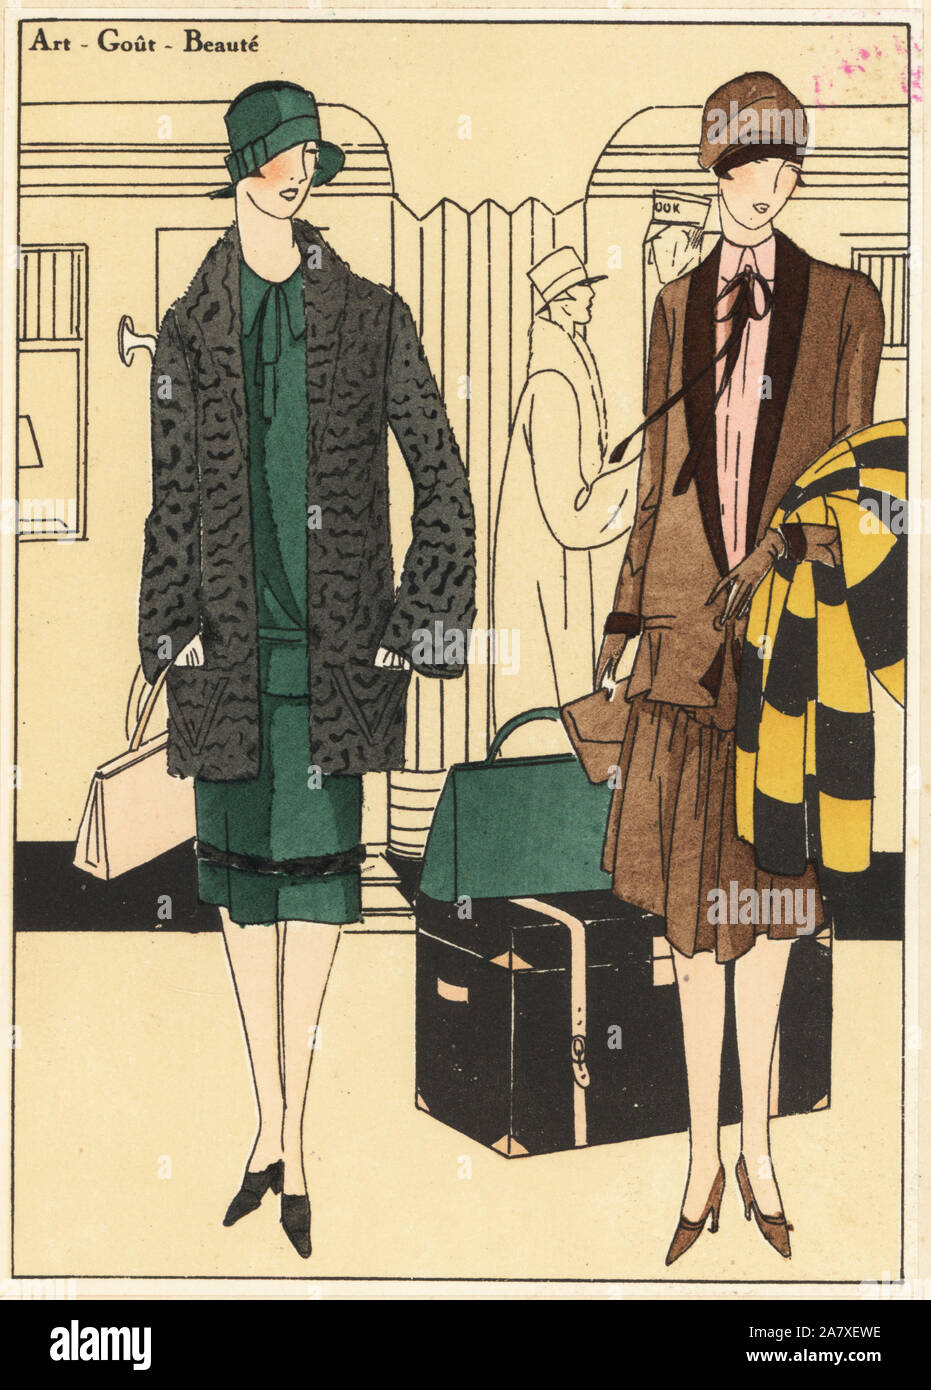 Women on a station platform with travel bags. One wears a sports ensemble in green wool and pony, and the other a visiting dress in ottoman bannelon and velvet. Handcolored pochoir (stencil) lithograph from the French luxury fashion magazine Art, Gout, Beaute, 1926. Stock Photo